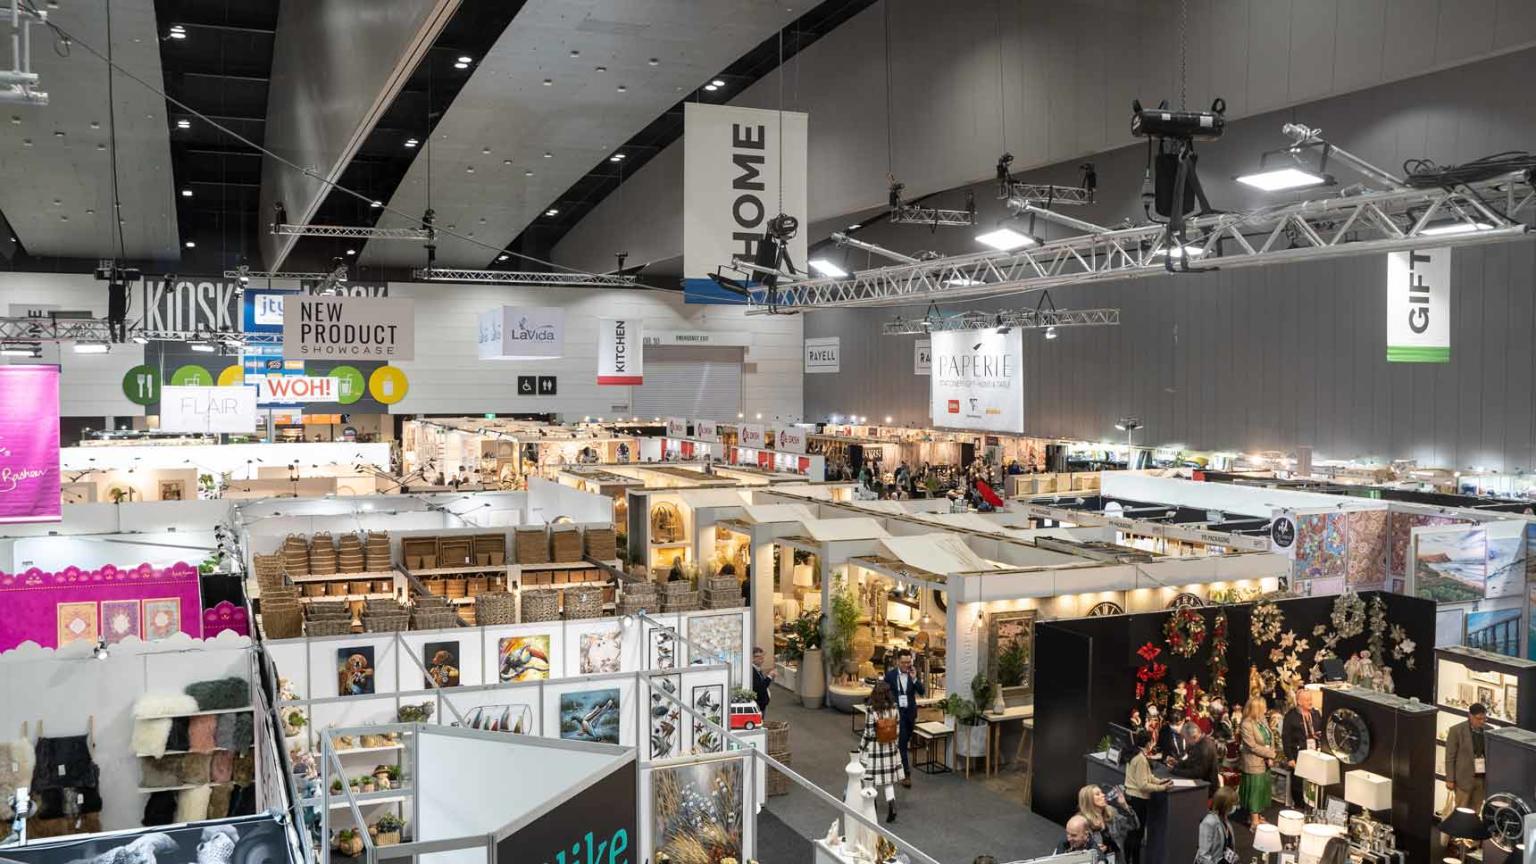 For those planning trade shows in Melbourne, we have a comprehensive timeline of exhibition events available.